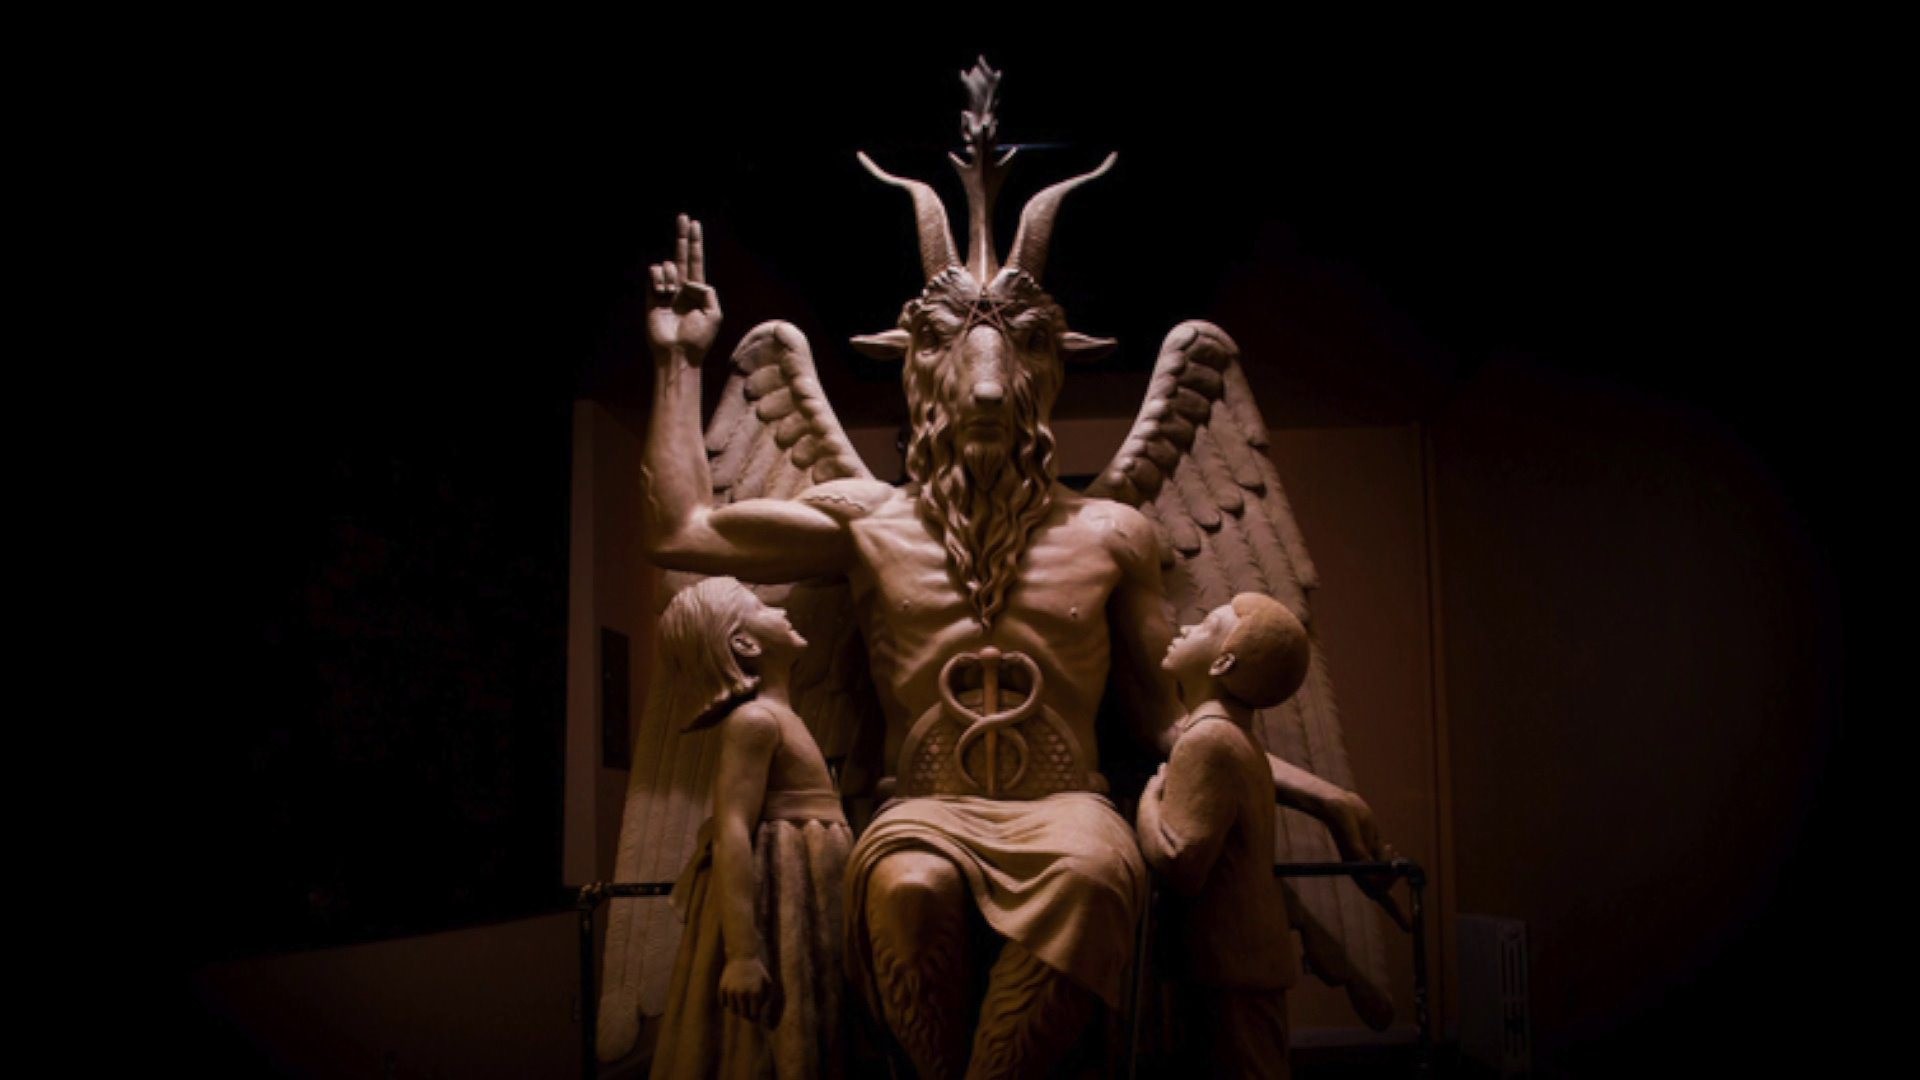 1920x1080 Satanic group unveils controversial Baphomet sculpture to cheers of 'Hail  Satan'